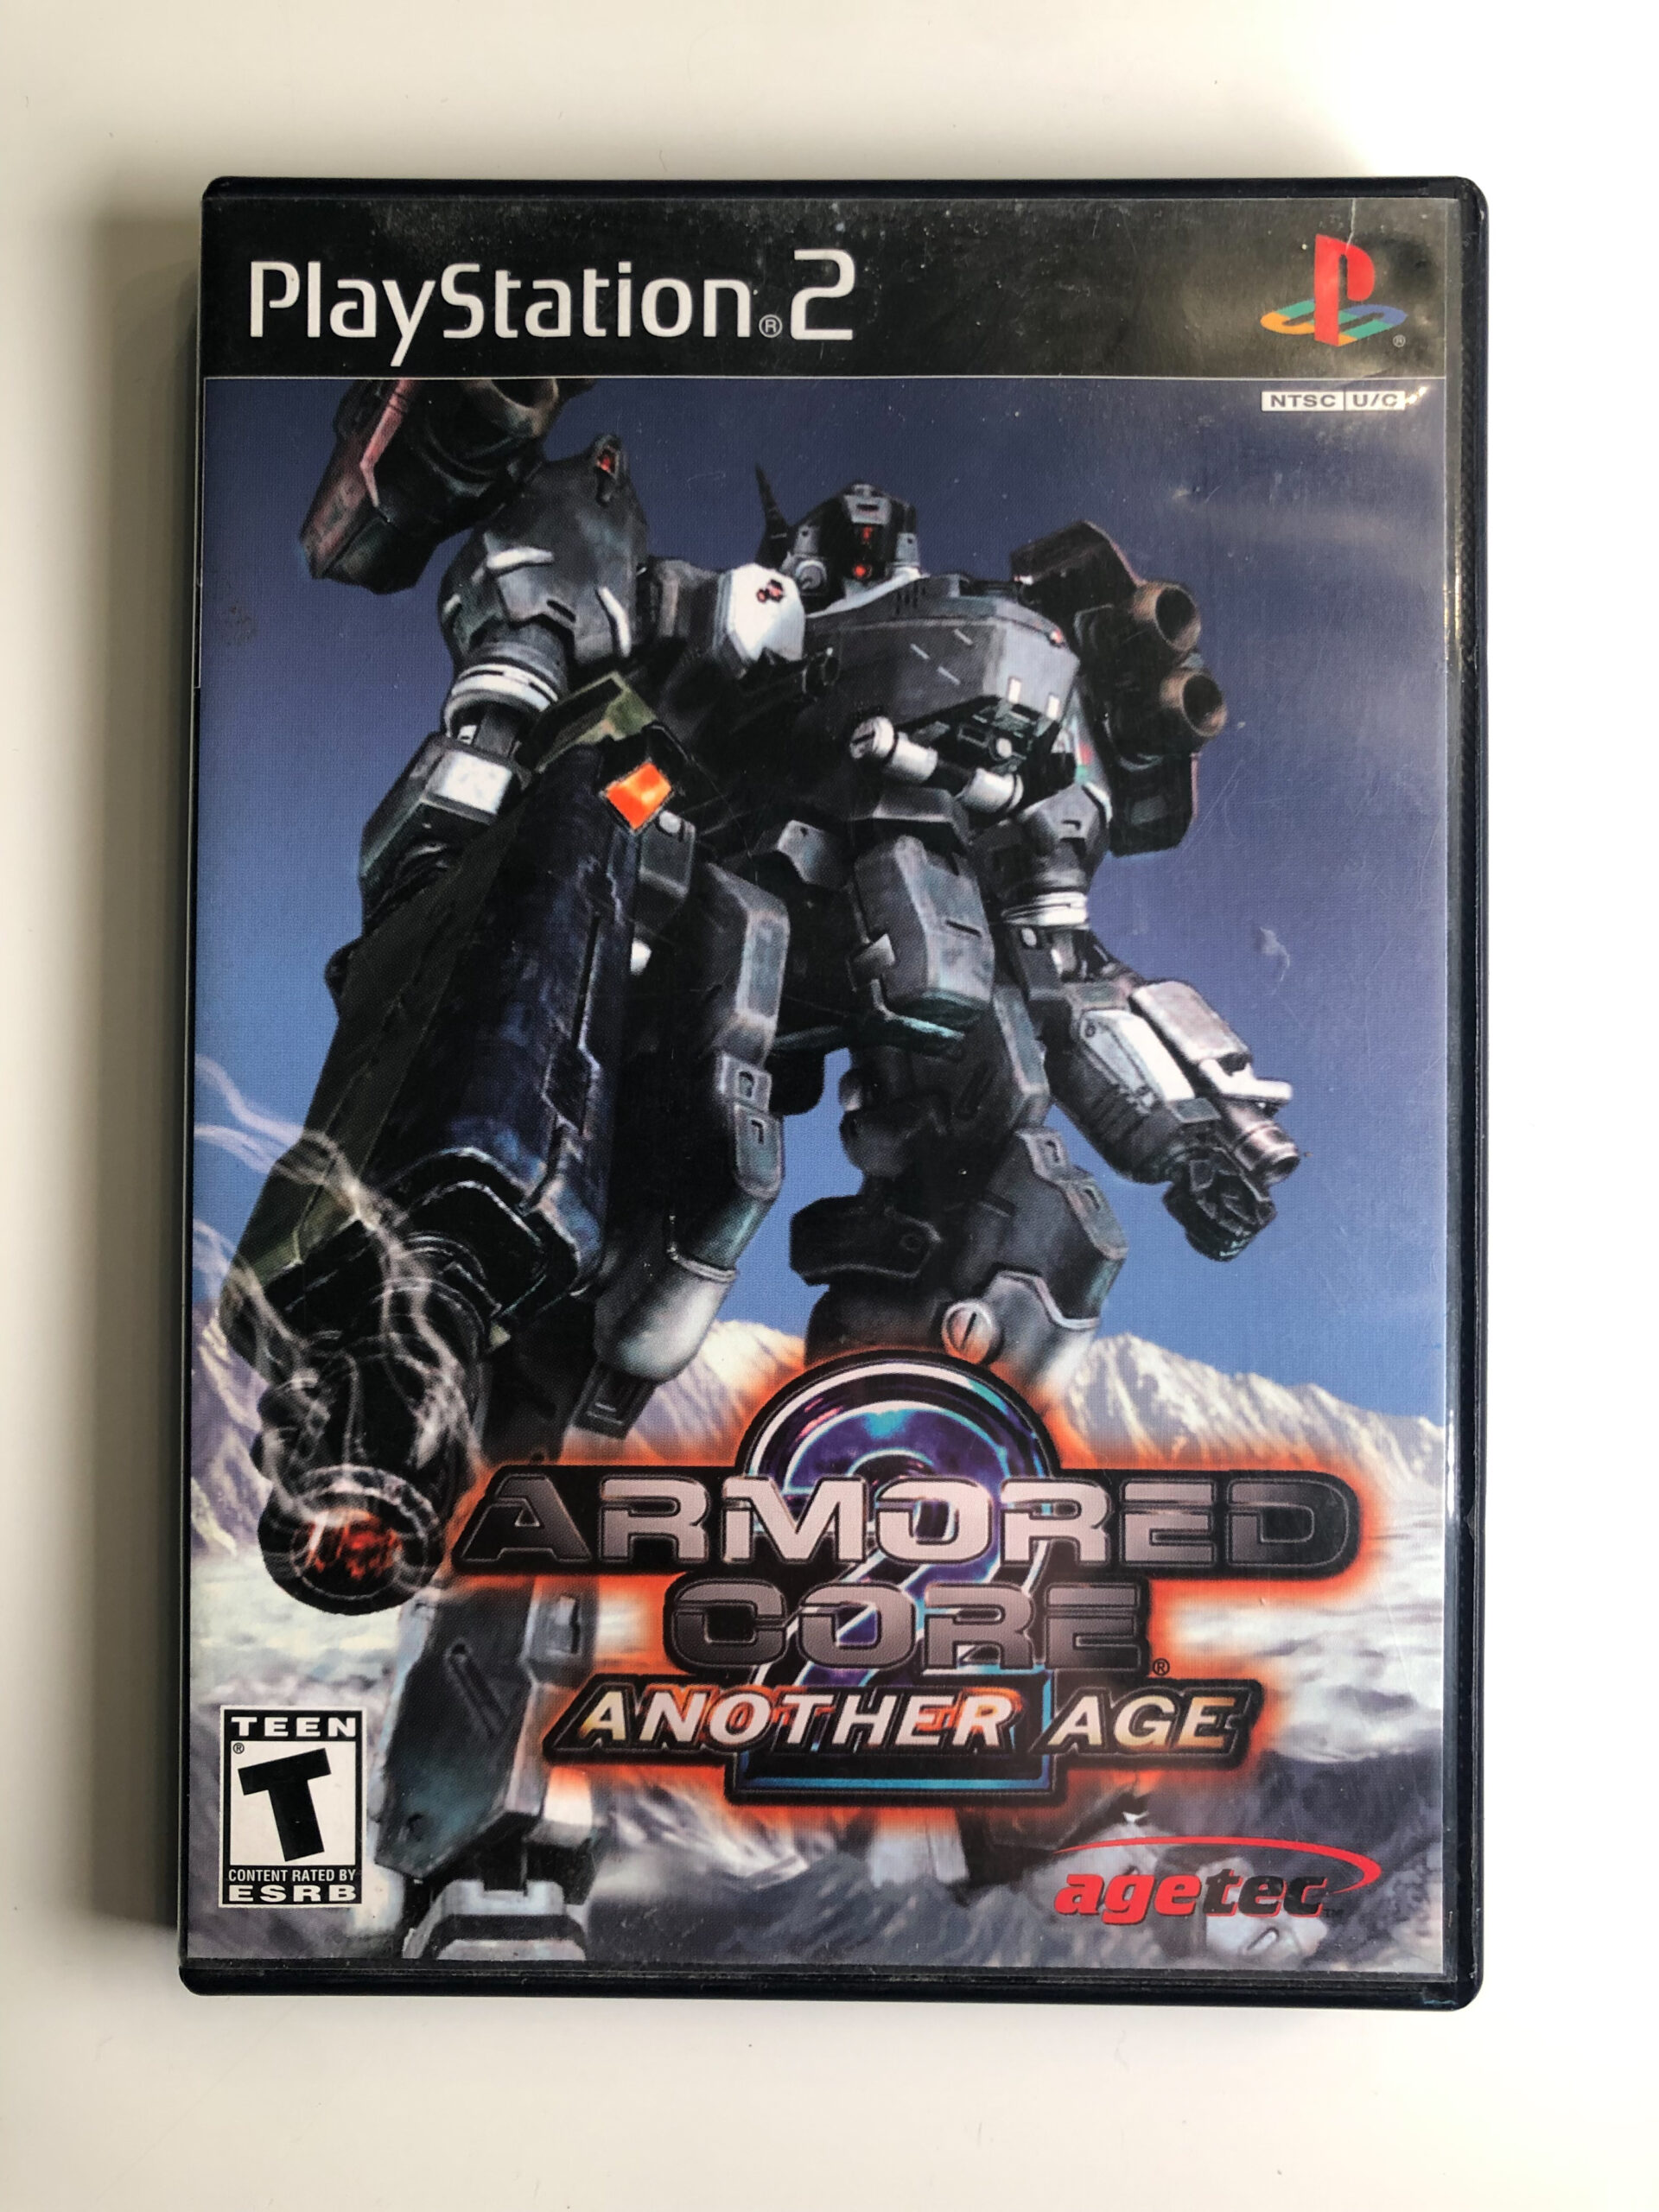 Armored Core 2/Another Age: Garbage graphics in both HW and SW